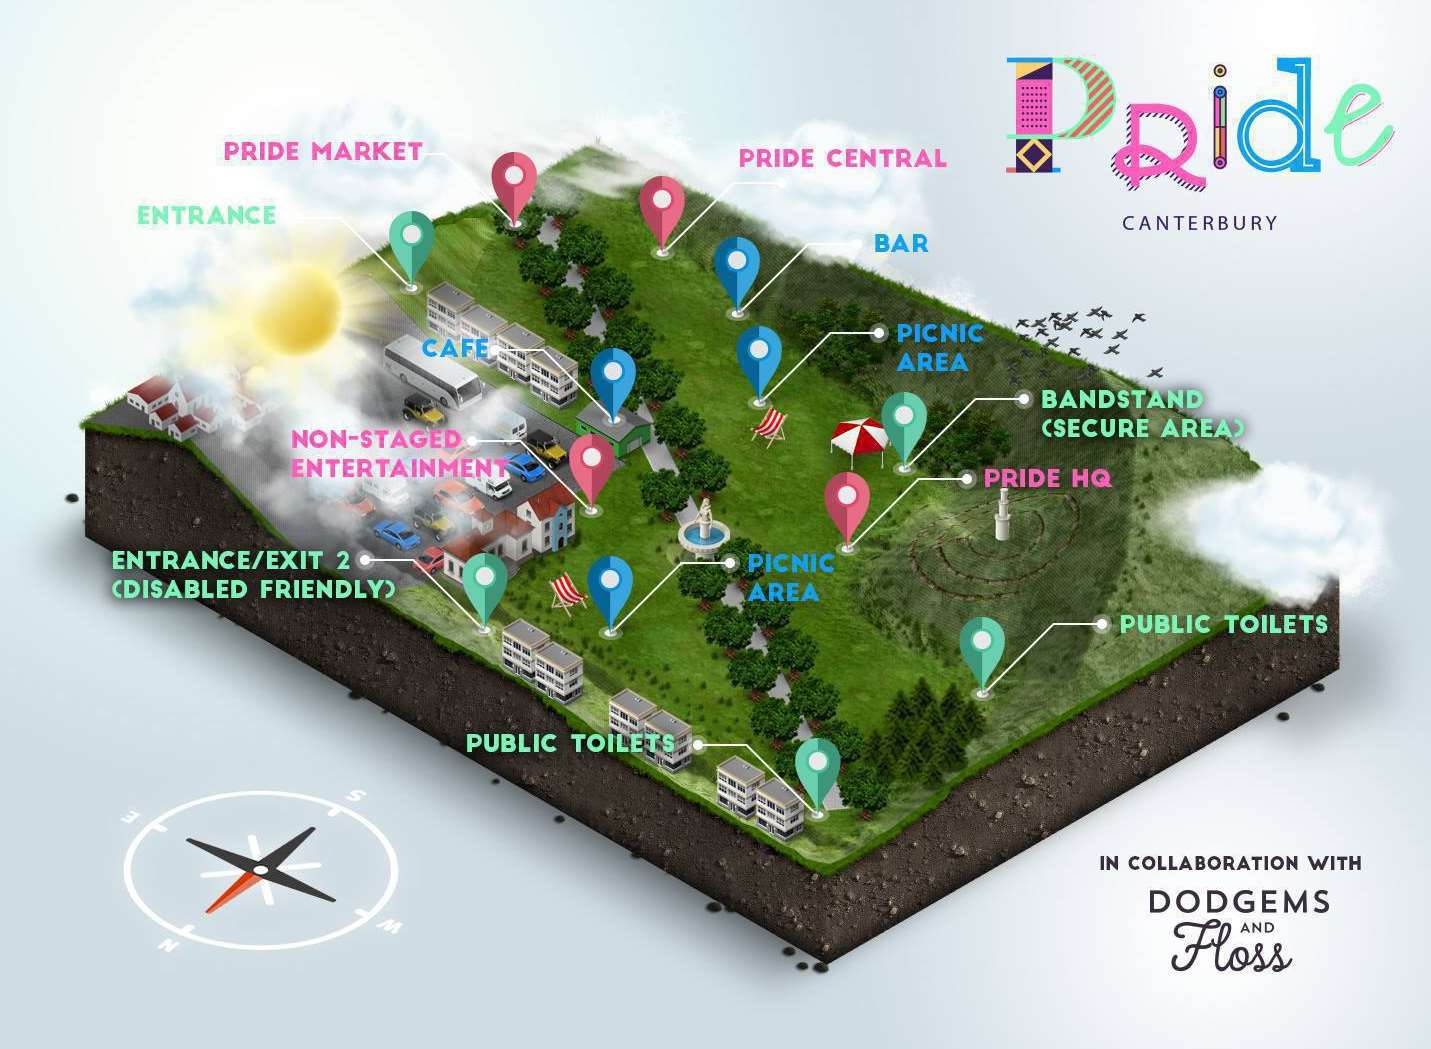 The route map of the spectacular parade